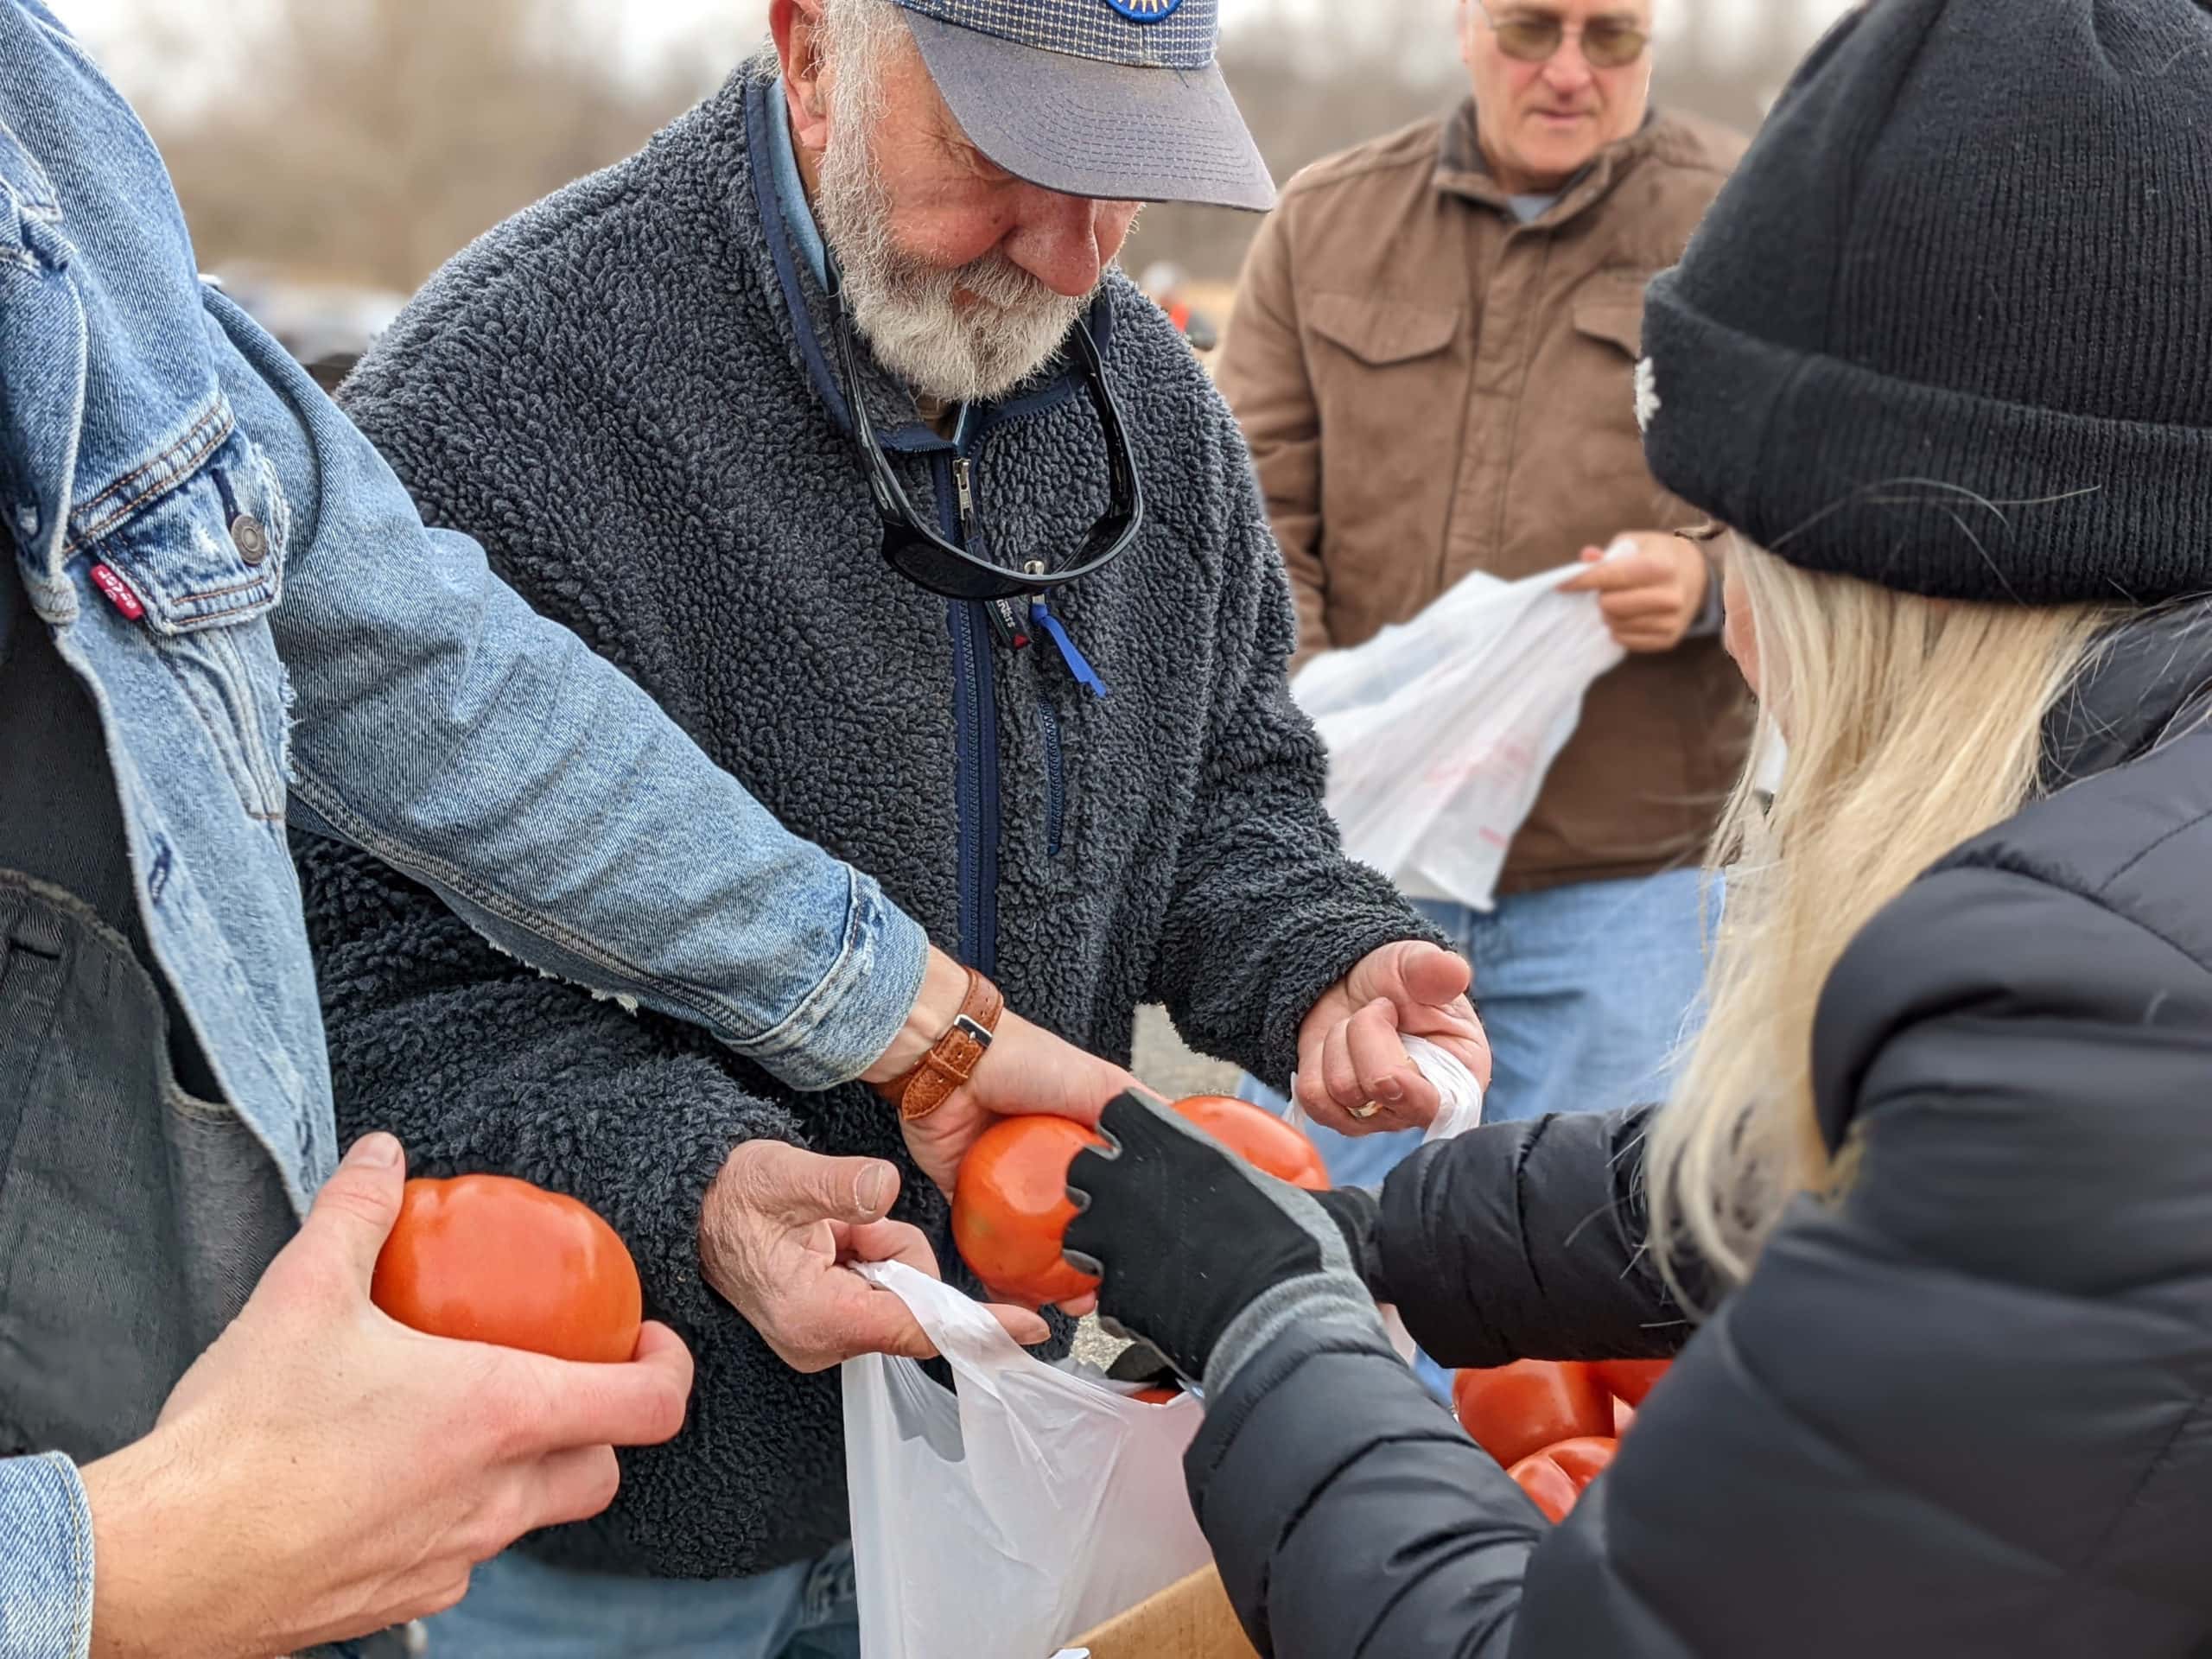 OneGenAway volunteers separate tomatoes into bags at a mobile food pantry distribution.